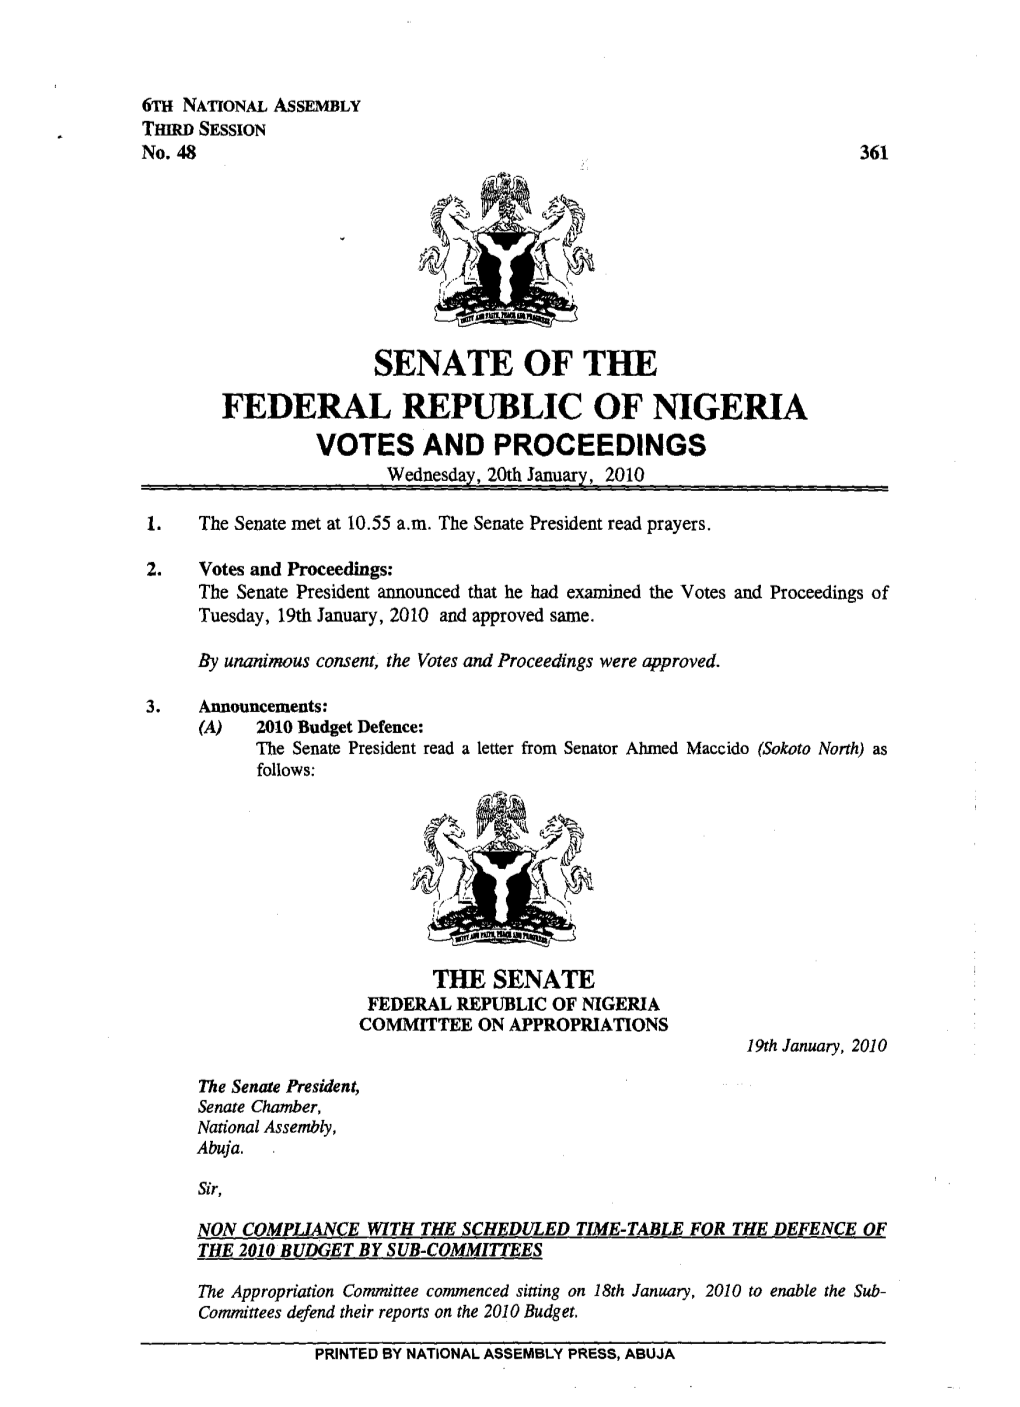 SENATE of the FEDERAL REPUBLIC of NIGERIA VOTES and PROCEEDINGS Wednesday, 20Th January, 2010